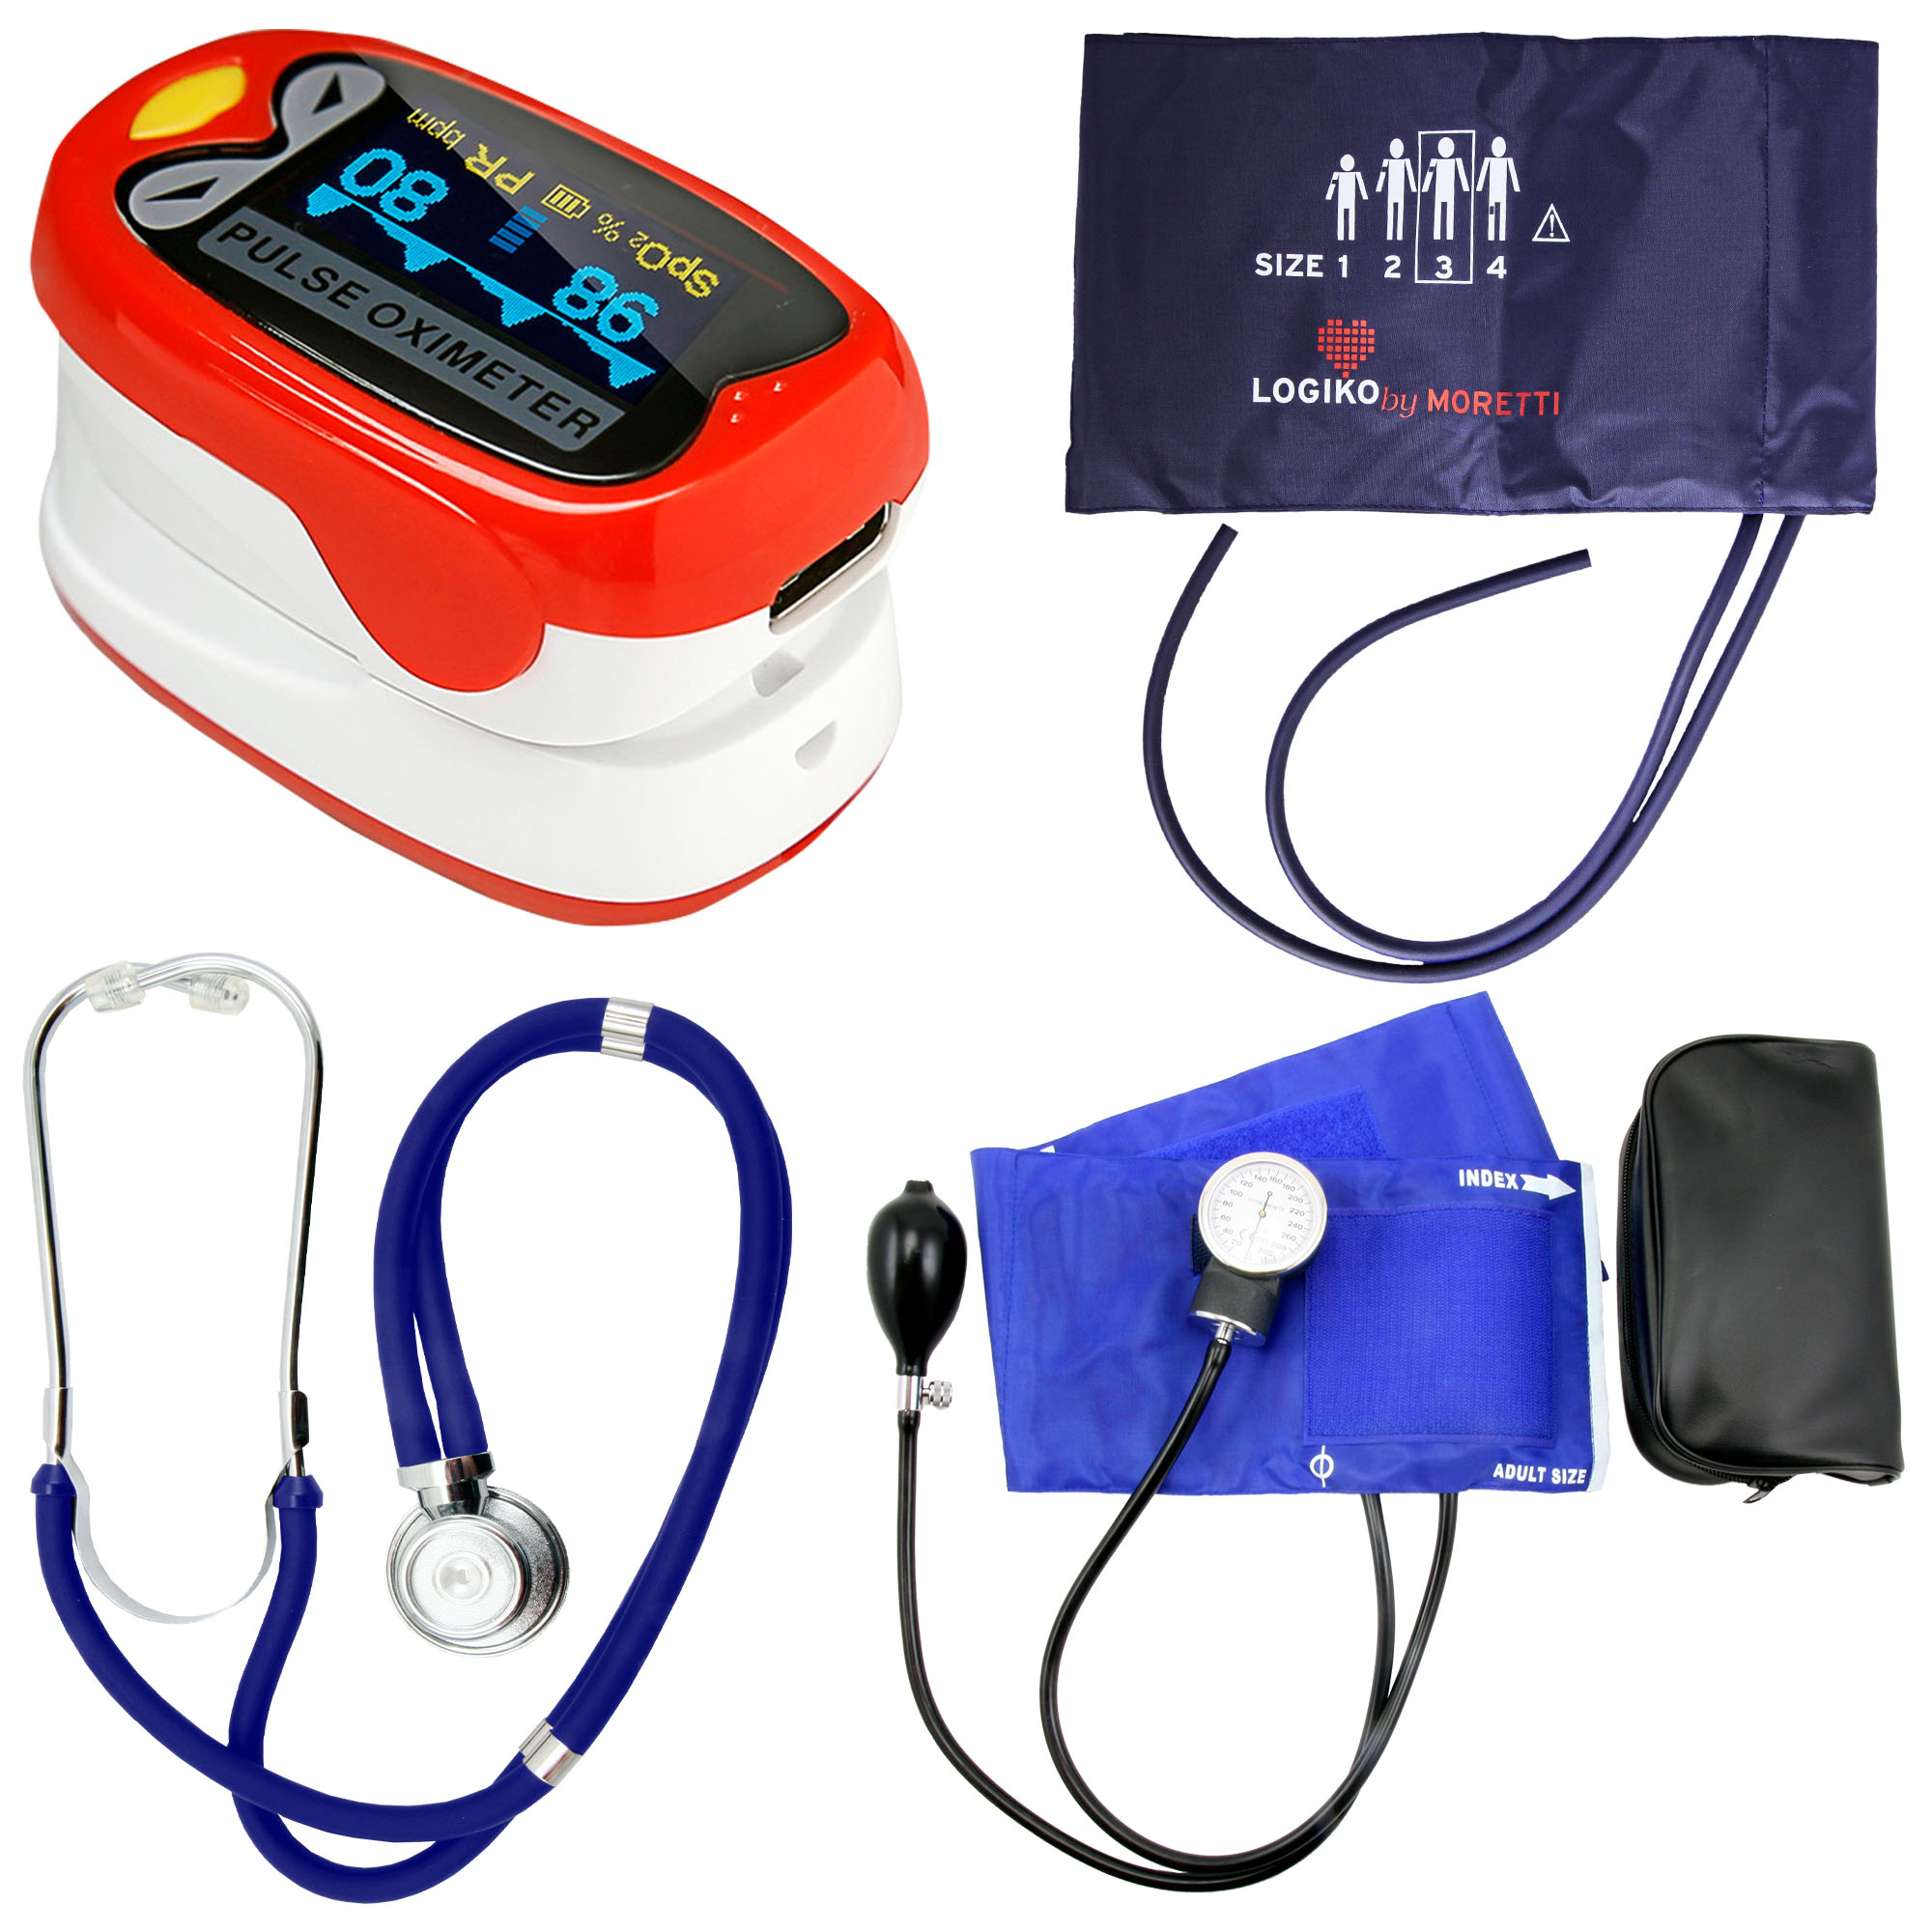 Medical practice/HEALTH MONITORING DEVICES/Blood Pressure Monitor, Stethoscope & Oximeter